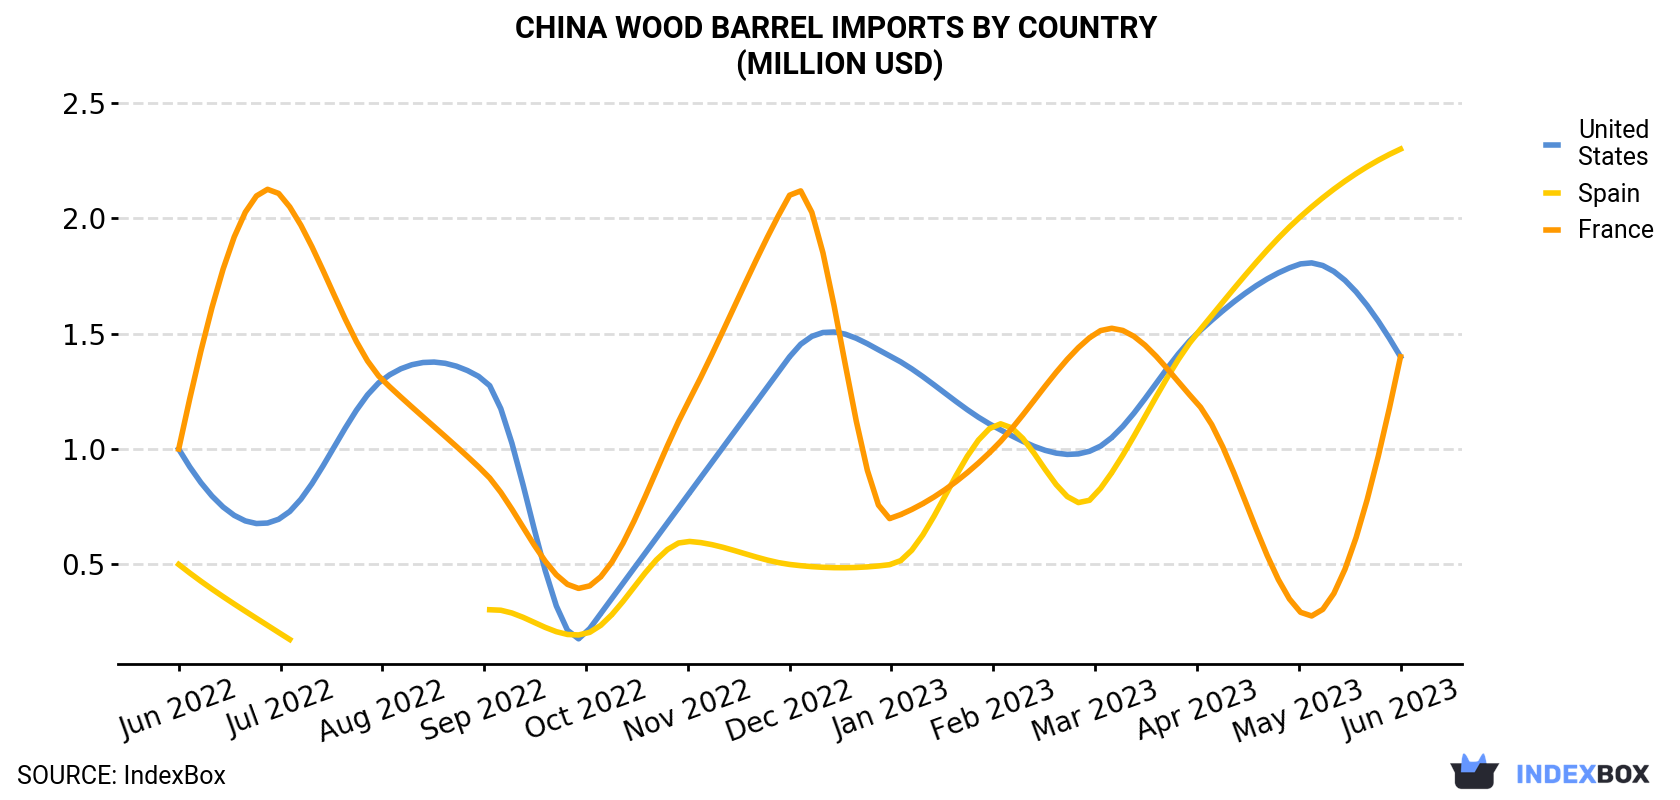 China Wood Barrel Imports By Country (Million USD)